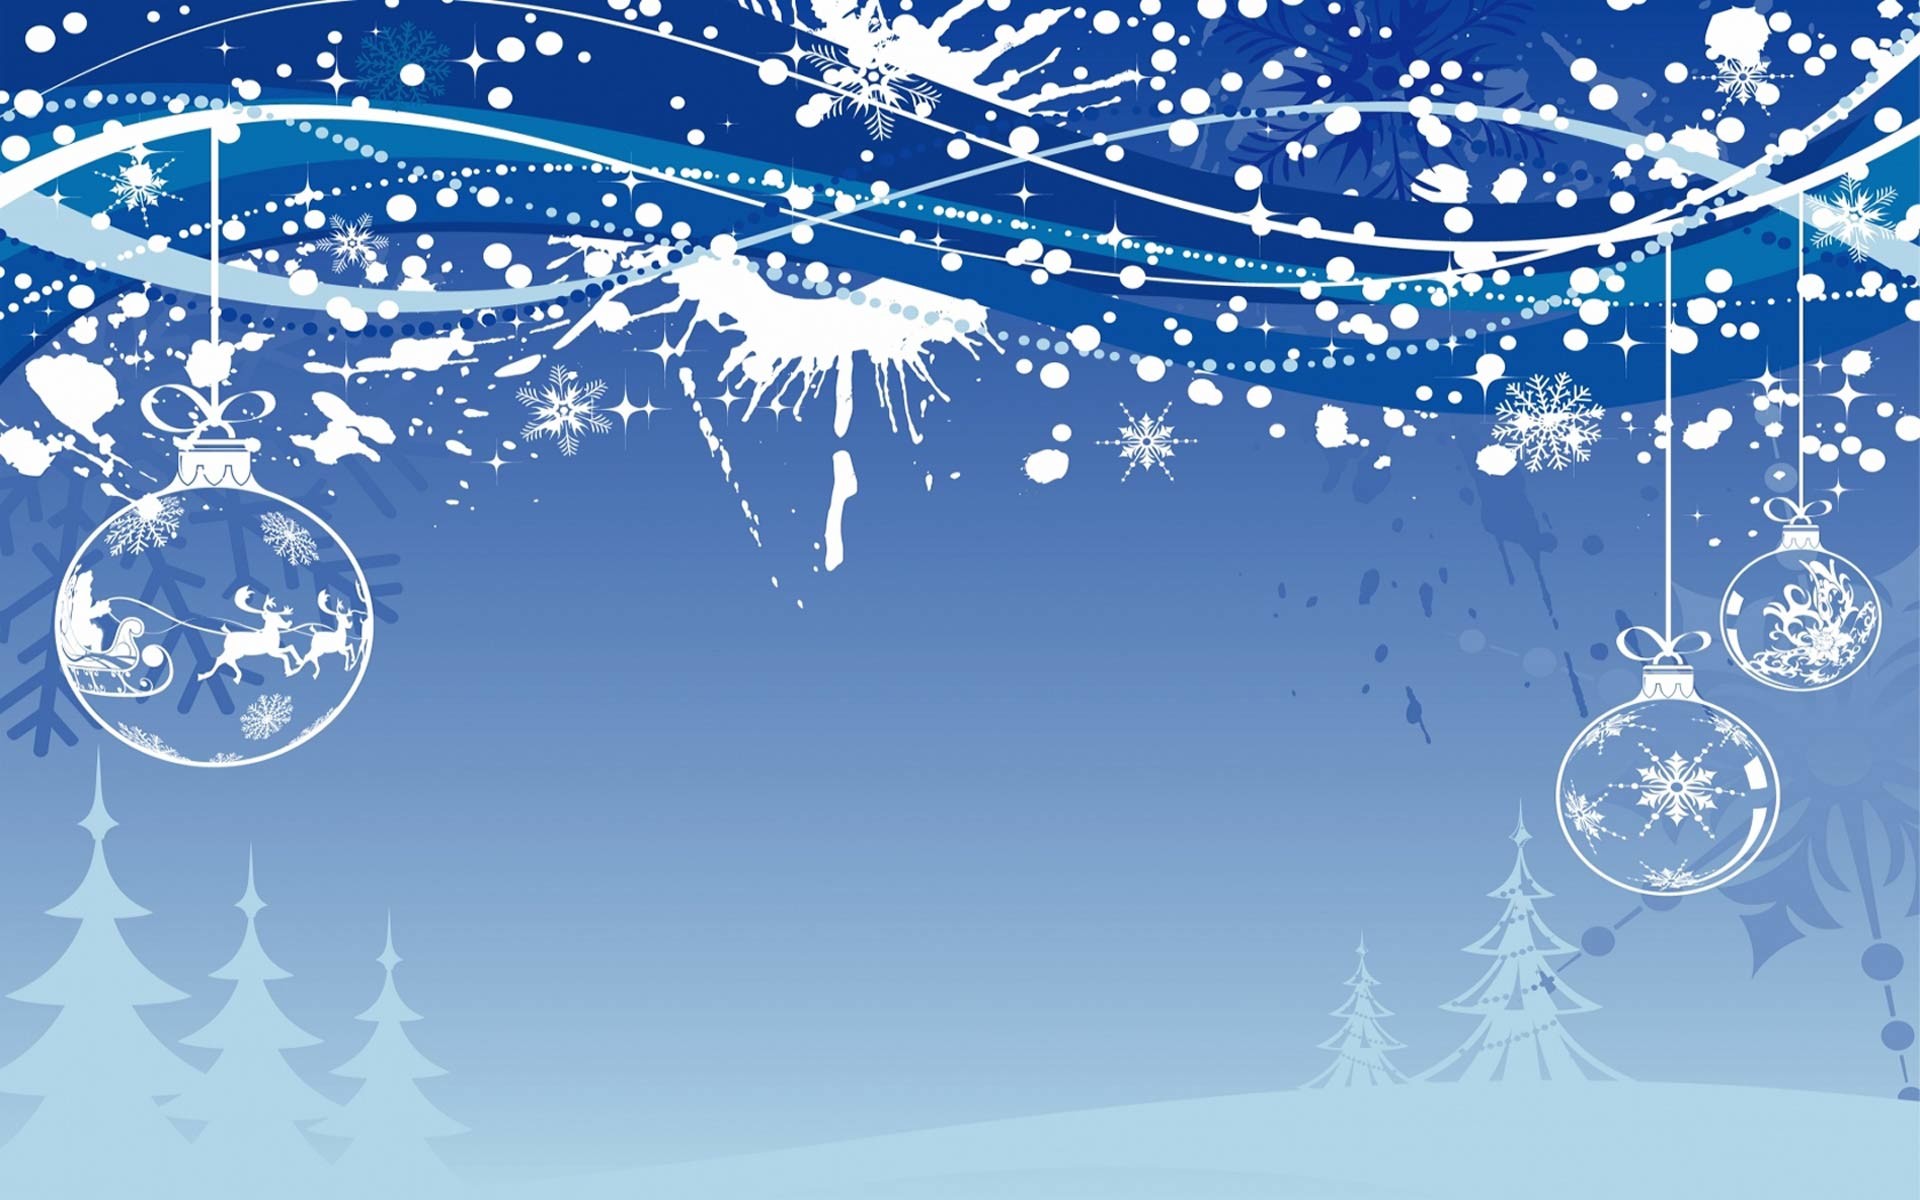 1920x1200 wallpaper android | free live christmas wallpaper android | Desktop .